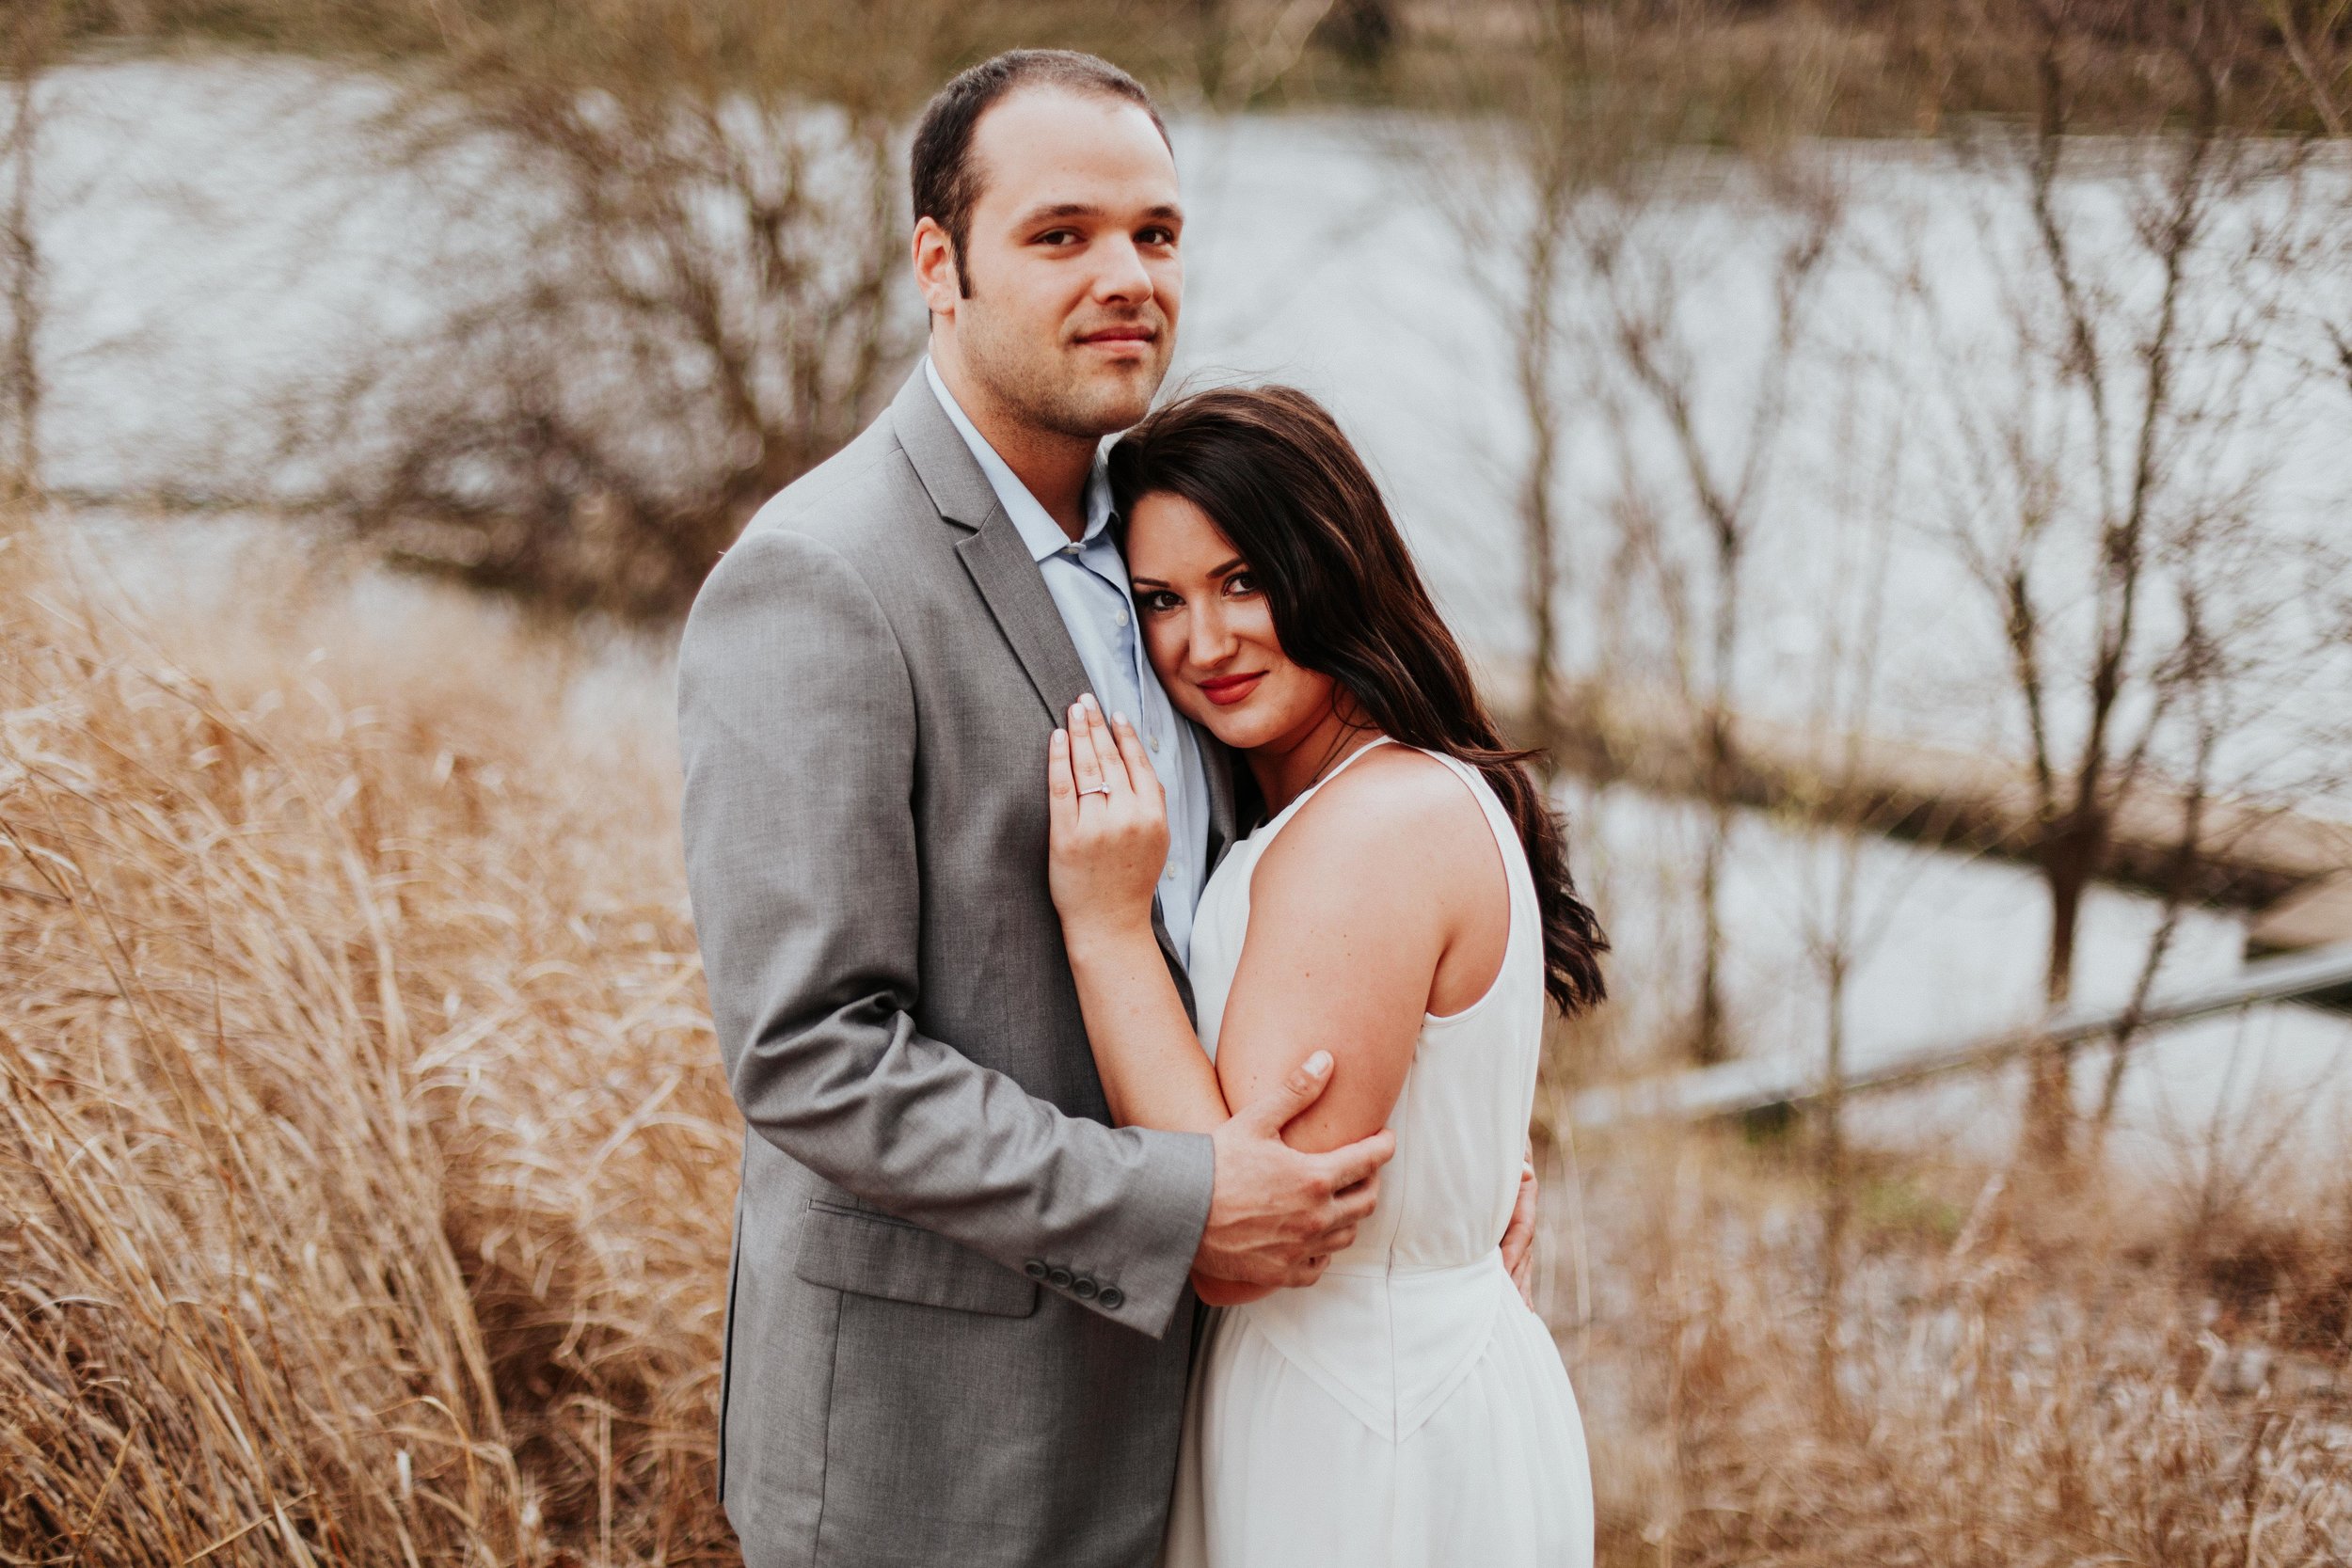 Top Engagement/Elopement Photographer Based in Nashville Emily Anne Photography Worldwide travel photographer 